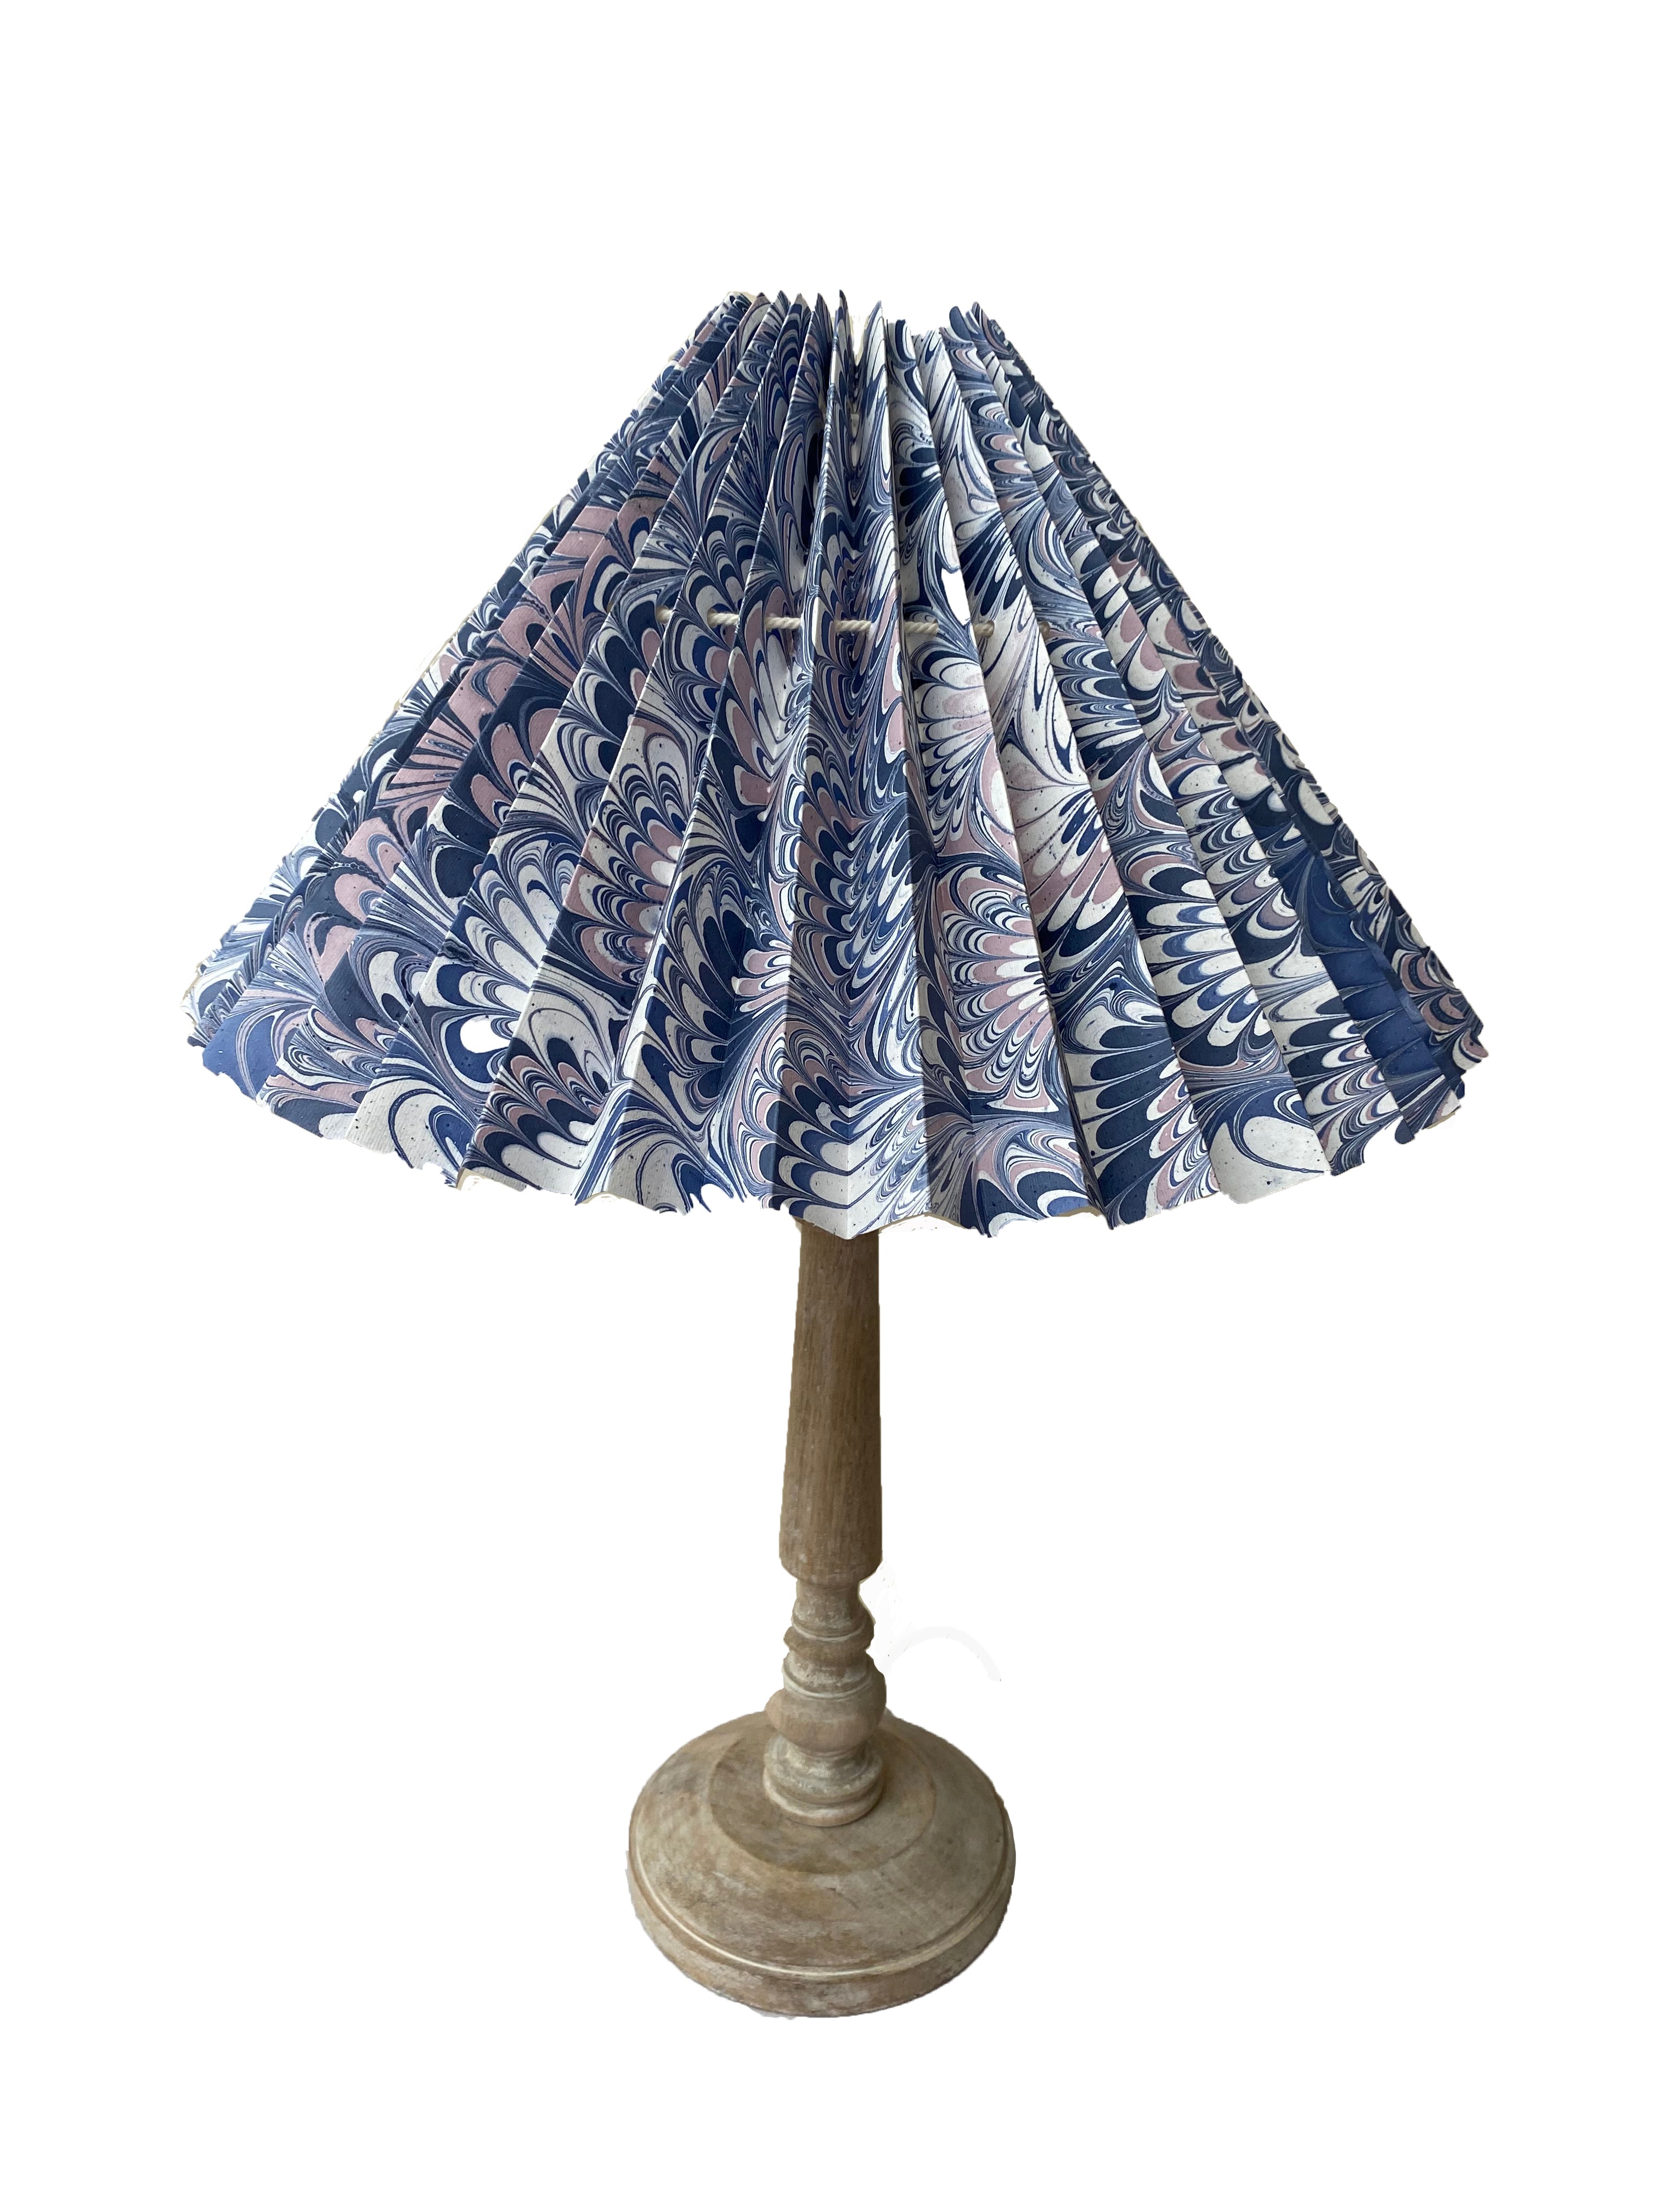 HANDMADE MARBELED PAPER LAMPSHADE IN BLUE, PINK AND WHITE - Sale 30% off.